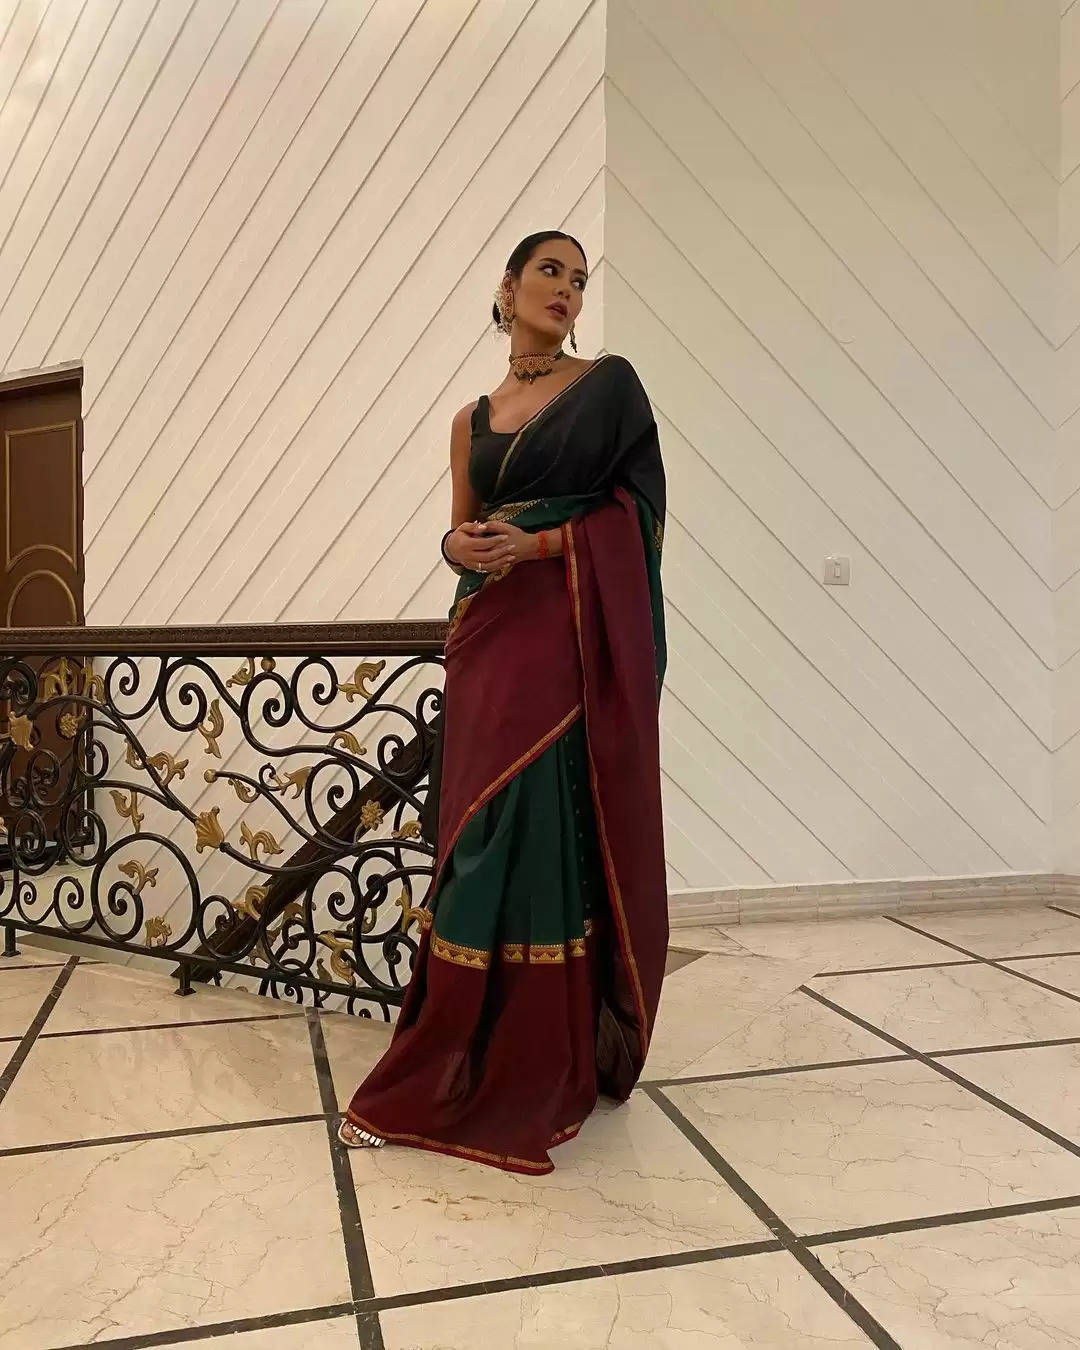 Photos: Esha Gupta Looks Ravishing In Saree,  Check Out The Diva's Sexy Pictures